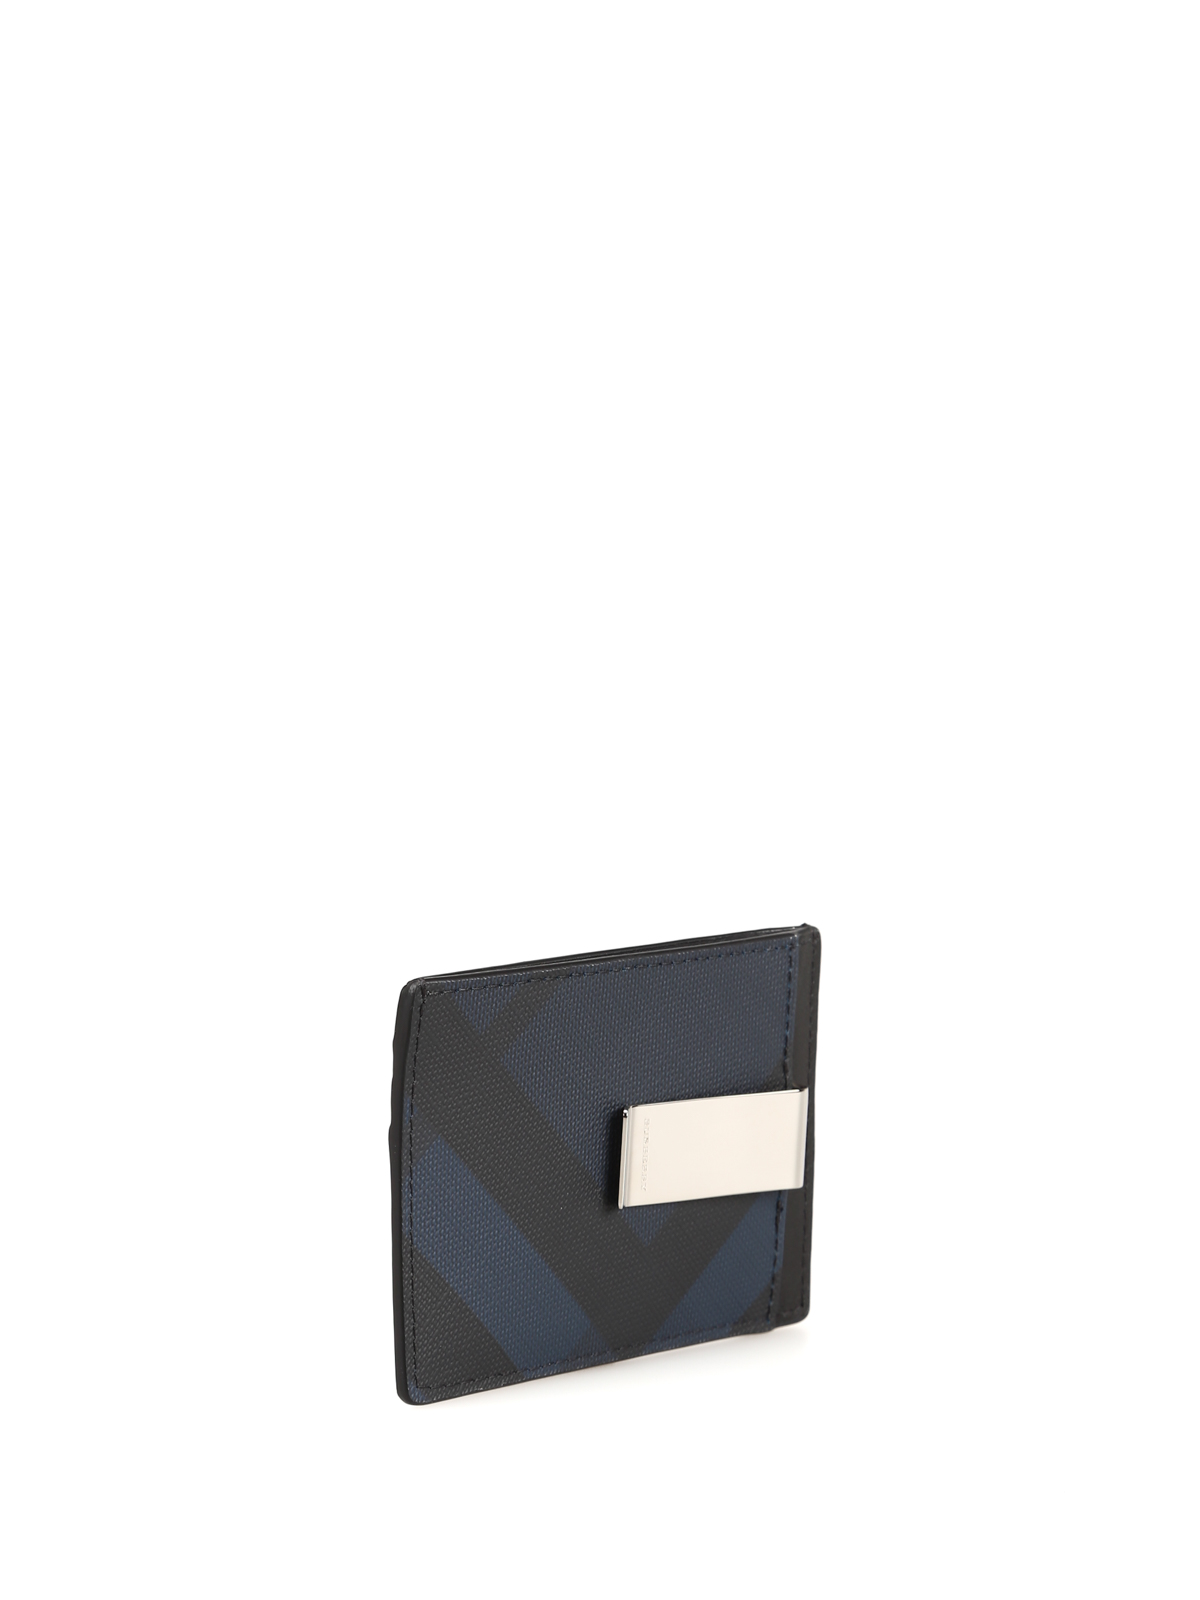 Chase card case with money clip 